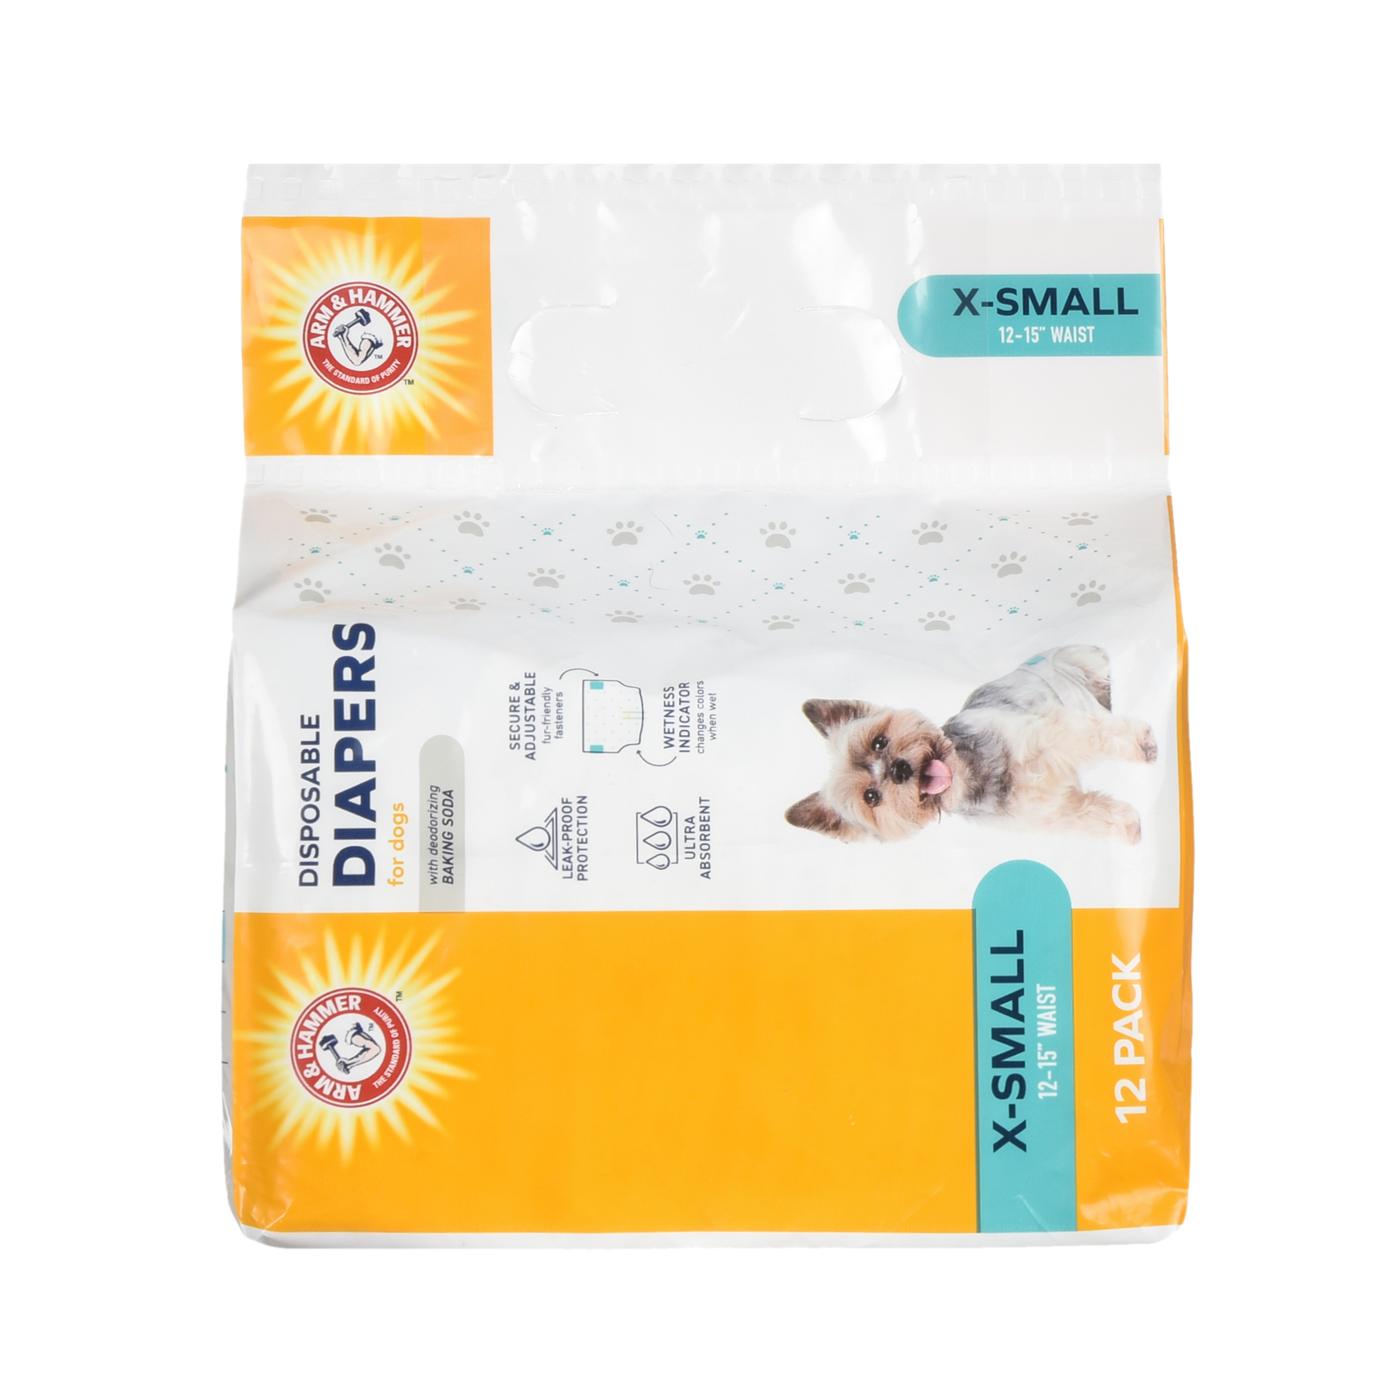 Arm & Hammer Disposable Dog Diapers - X-Small; image 3 of 3